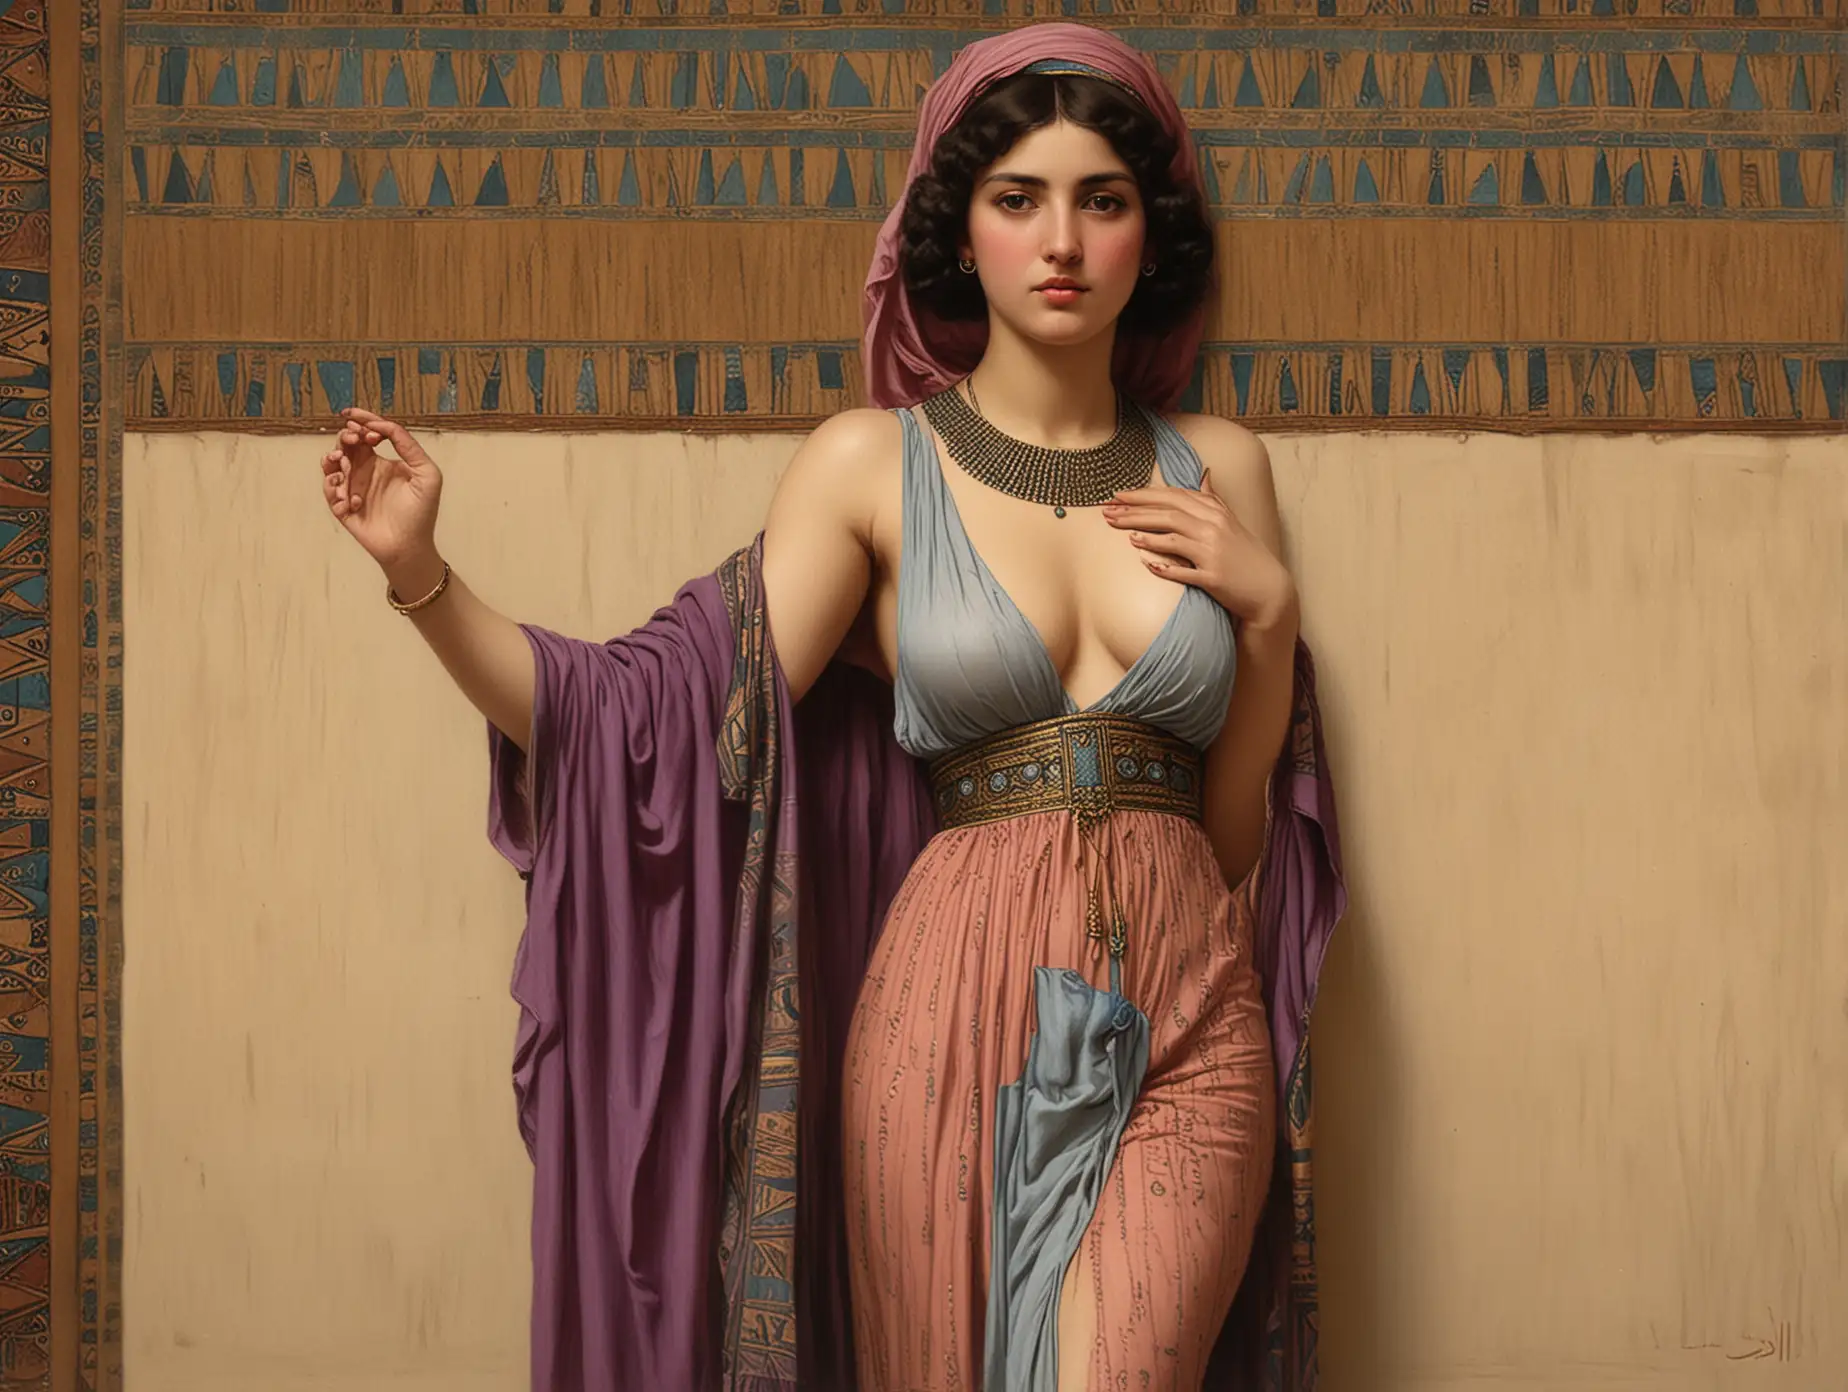 John-William-Godward-Painting-of-Egyptian-Woman-in-Harem-with-Thin-Robe